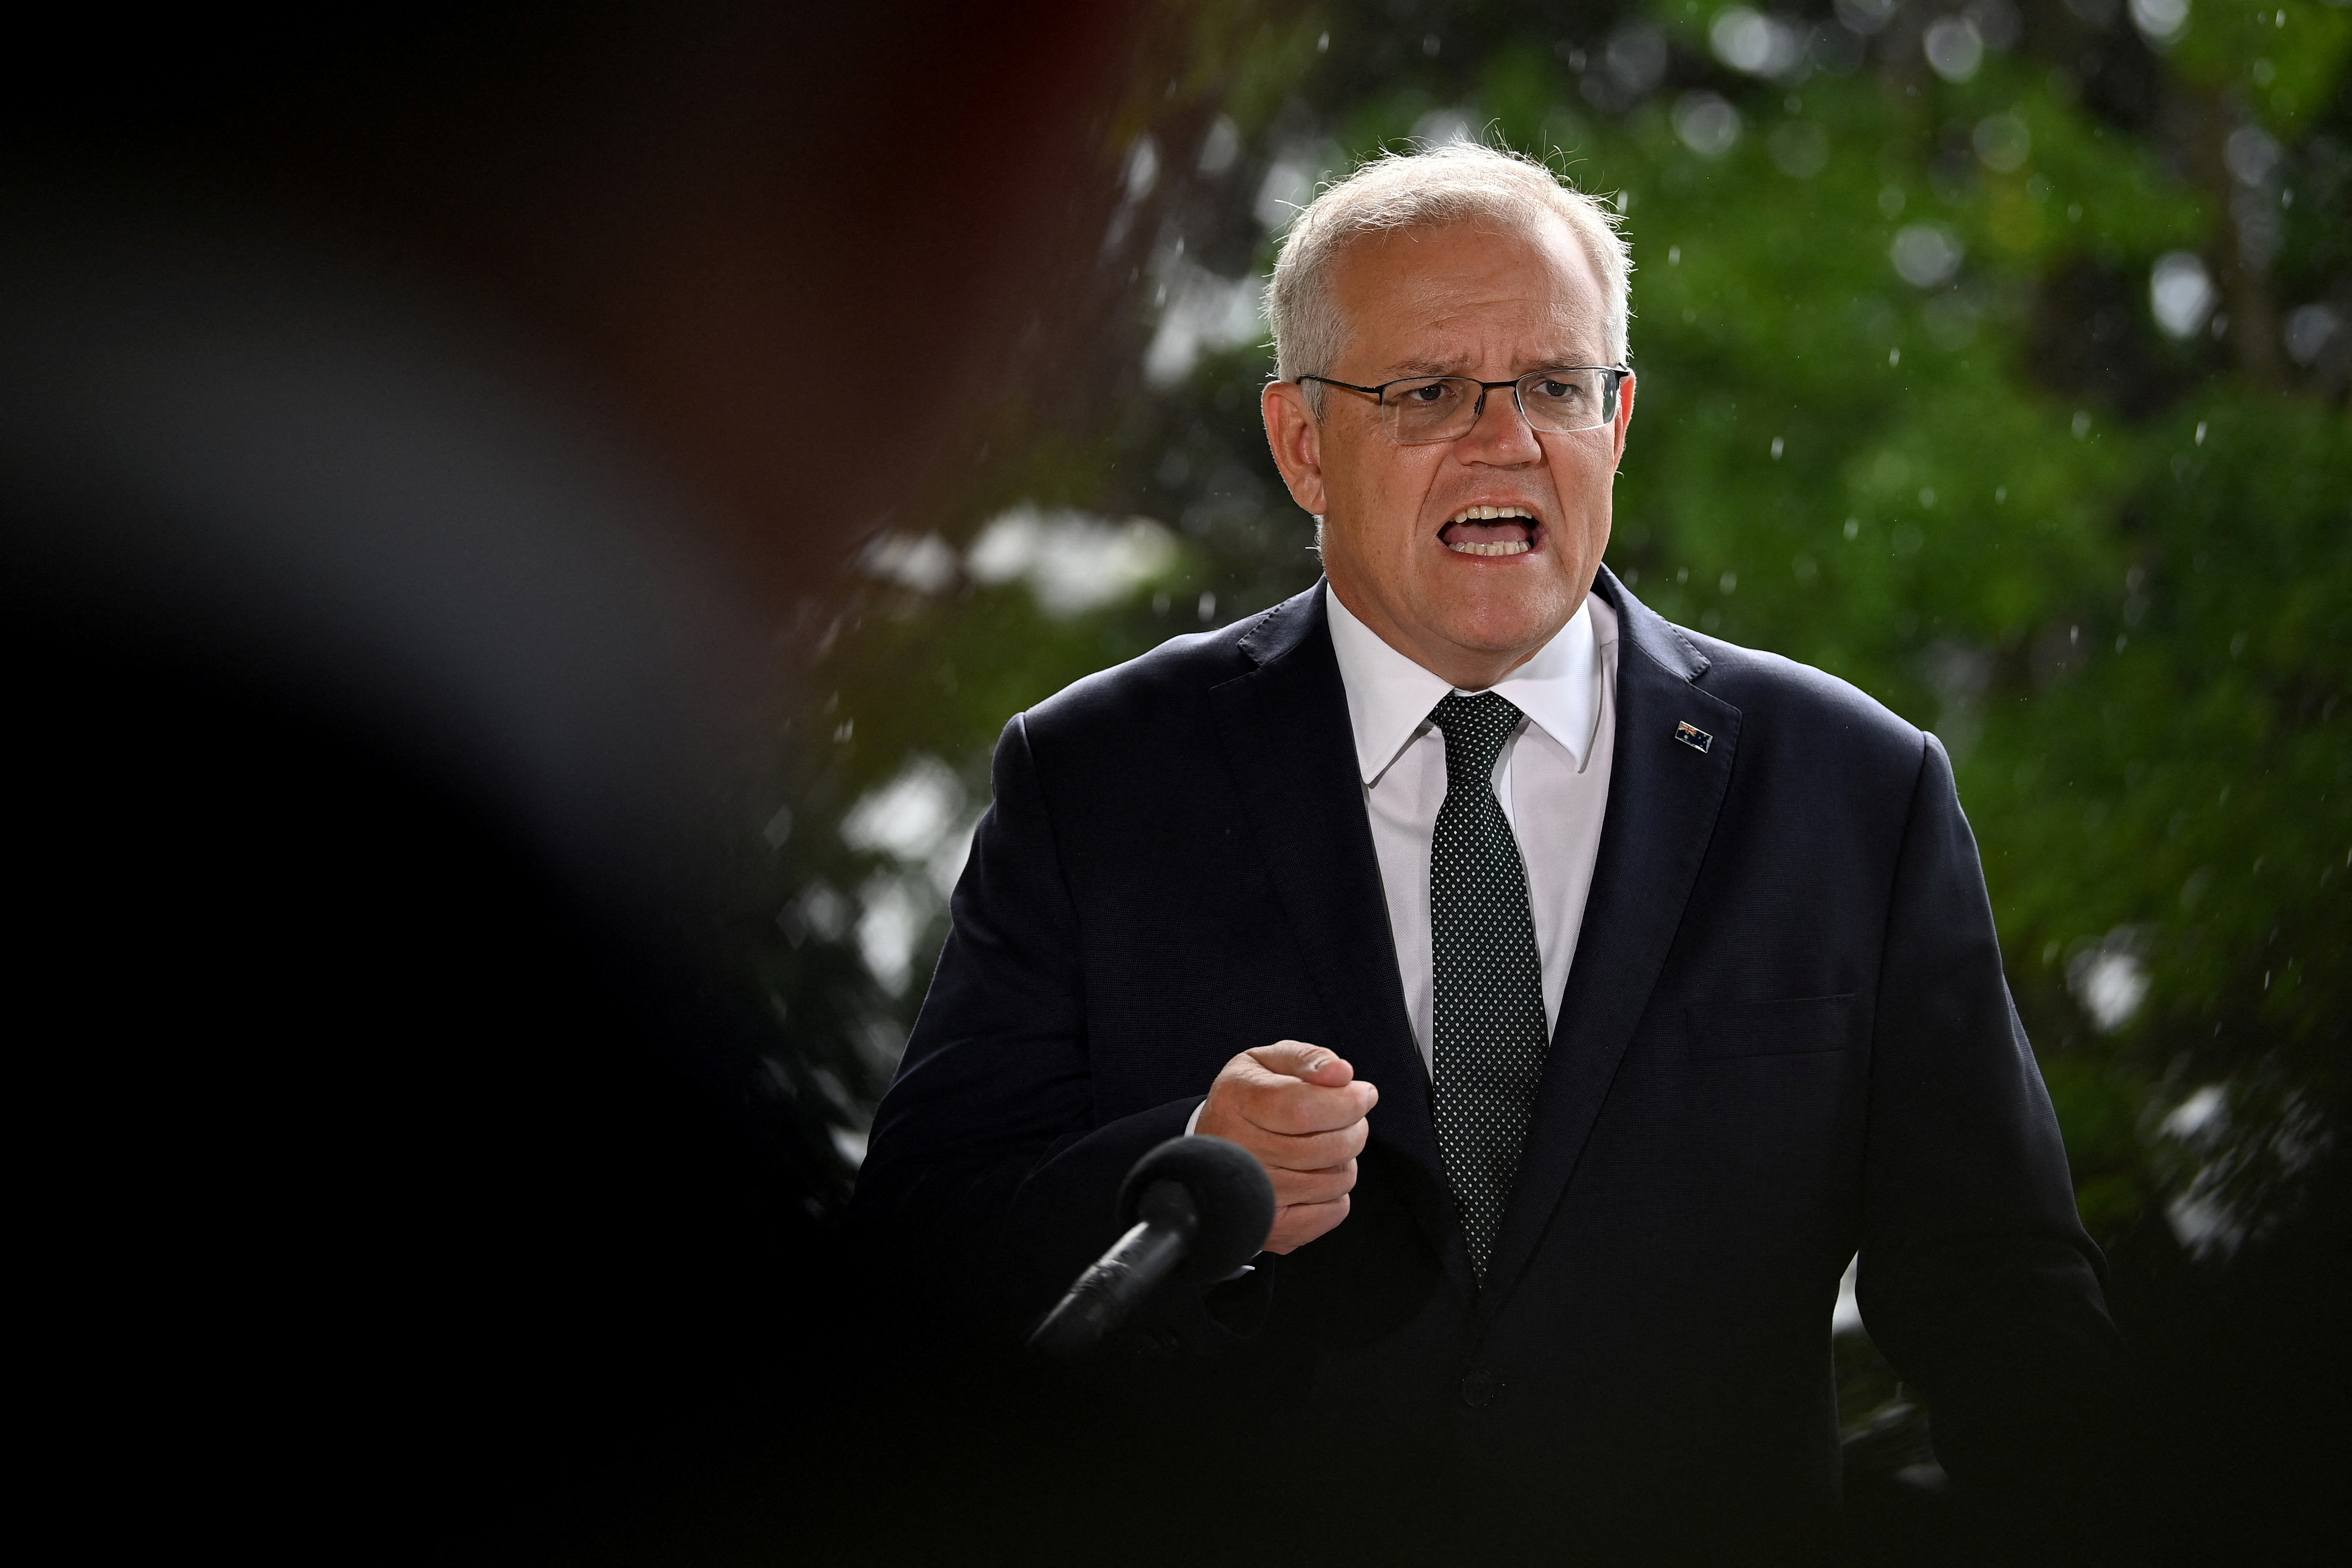 Australia's PM Morrison speaks to the media during a press conference at Kirribilli House in Sydney